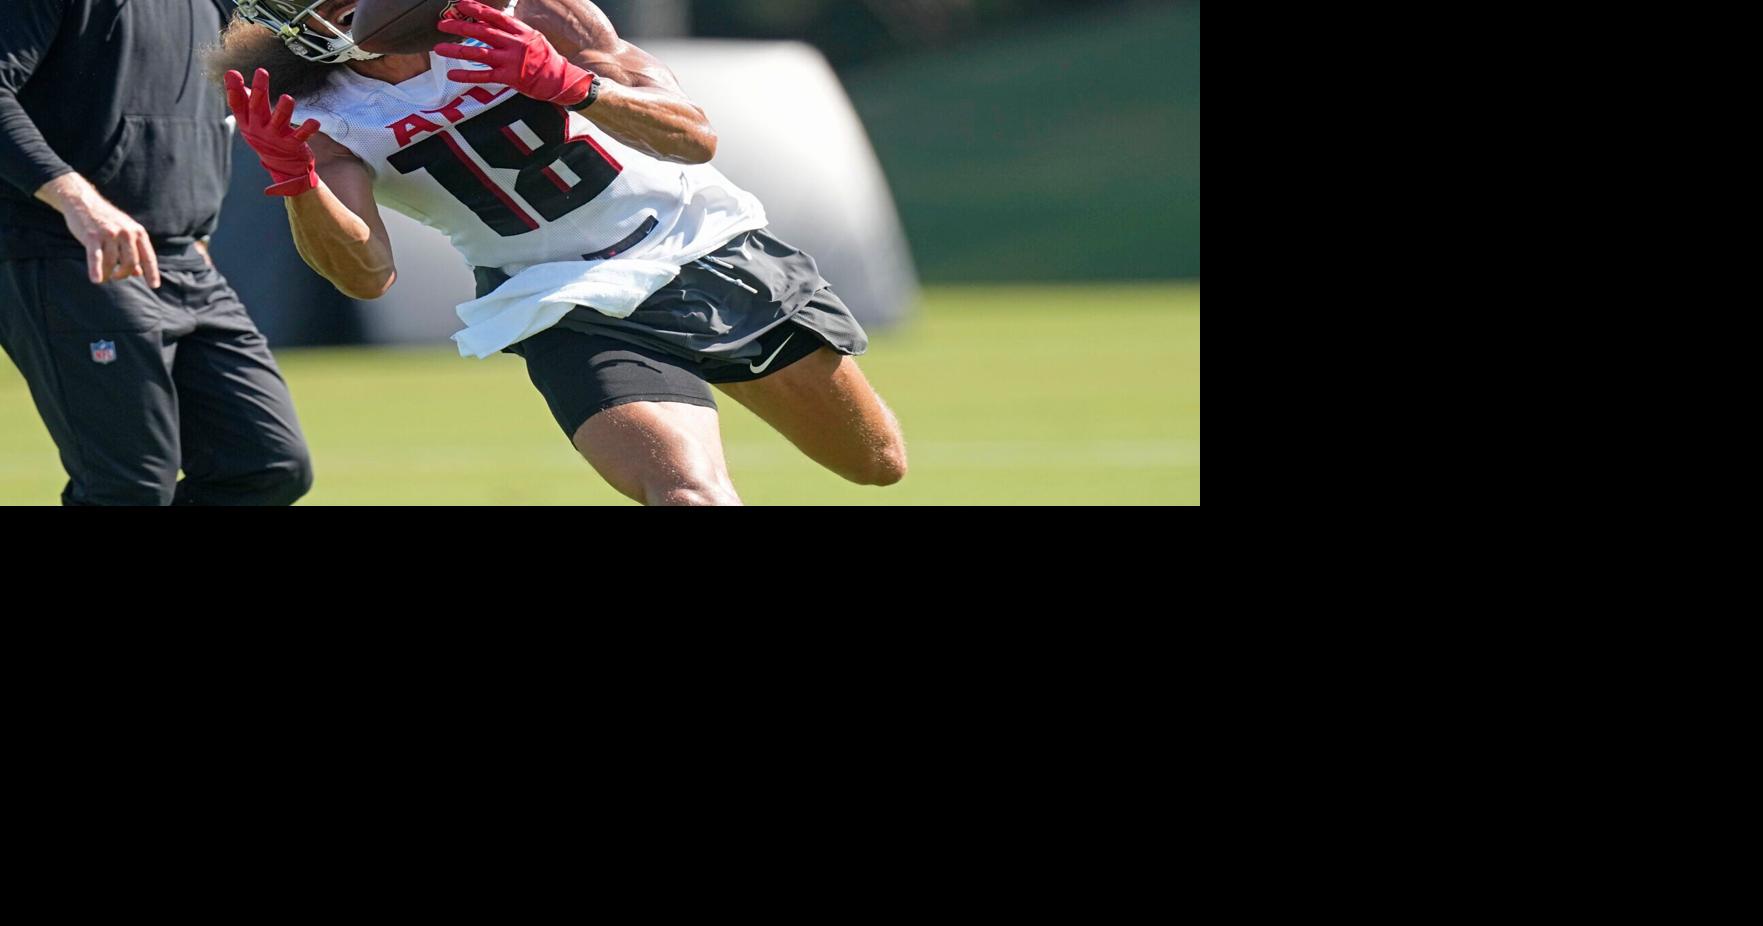 Hollins adds size, eccentric outlook to Falcons at receiver